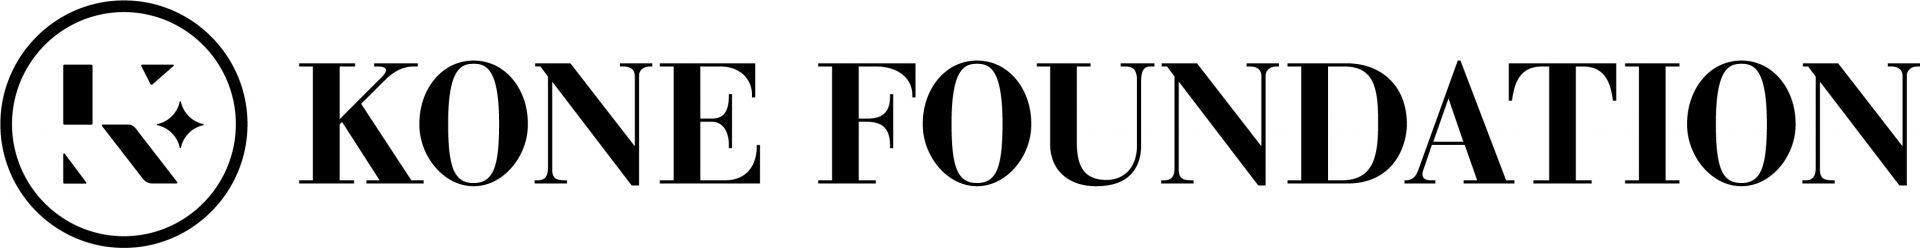 Kone Foundation's logo. The name of the foundation is written in capital letters. In front of the name, there are parts of the letter 'K' inside a circle, along with a small star.